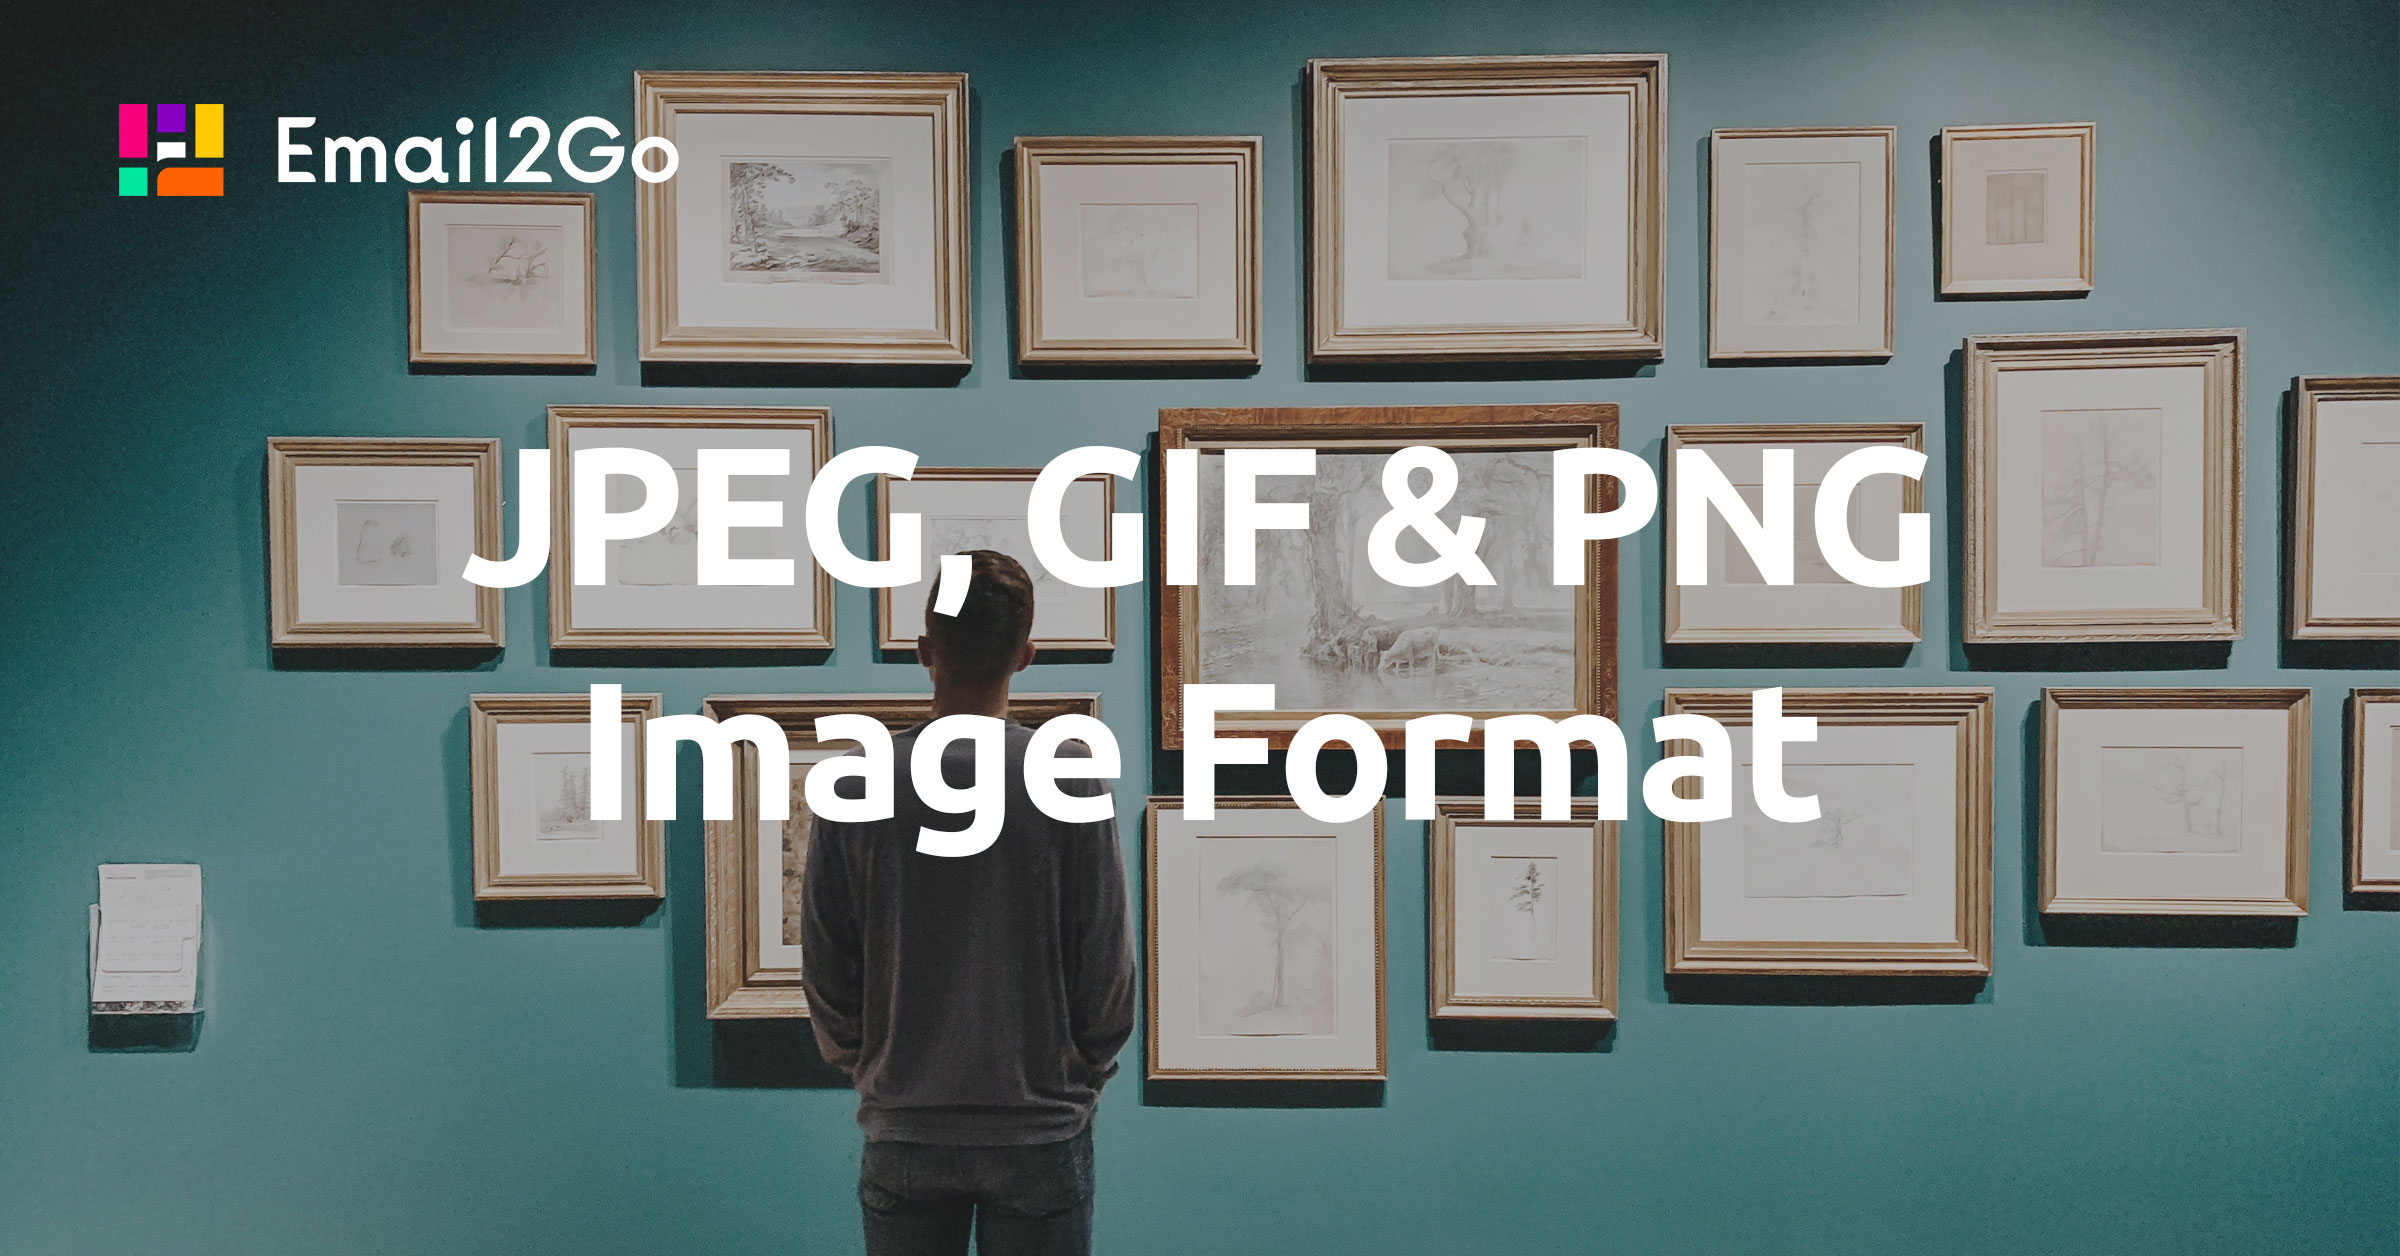 JPEG, GIF & PNG Image Format in HTML Emails